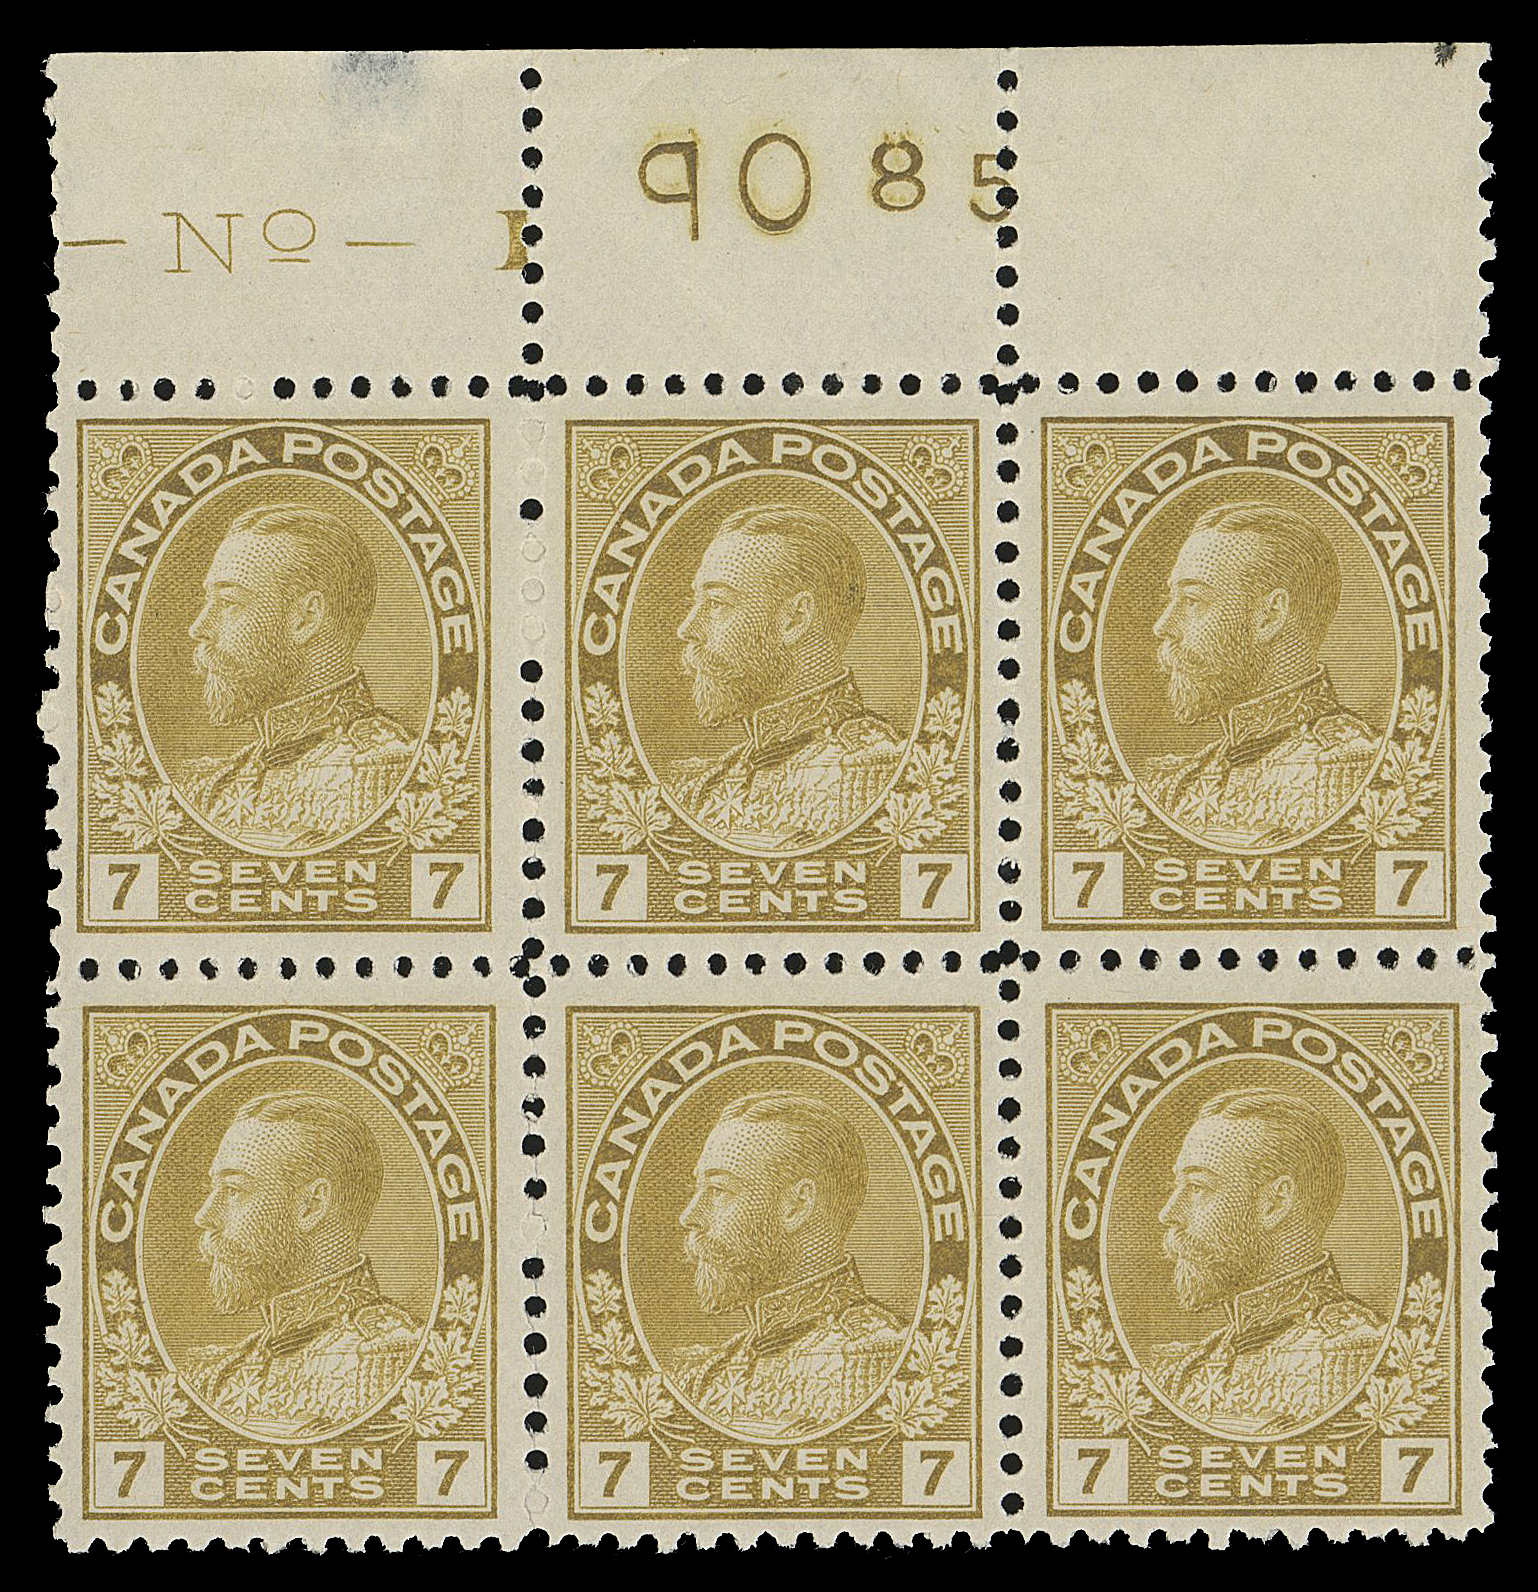 ADMIRAL STAMPS  113b,A remarkably well centered block of six with large part of plate "No. - 1" imprint and printing order number "85" at right, in the unmistakable early Straw shade; natural diagonal gum bend on right pair and vertical perforations partly severed between first and second columns, small thin in selvedge, all stamps NEVER HINGED. One of the key shades of the Admiral series, VF NH (Unitrade 113b; cat. $8,400)